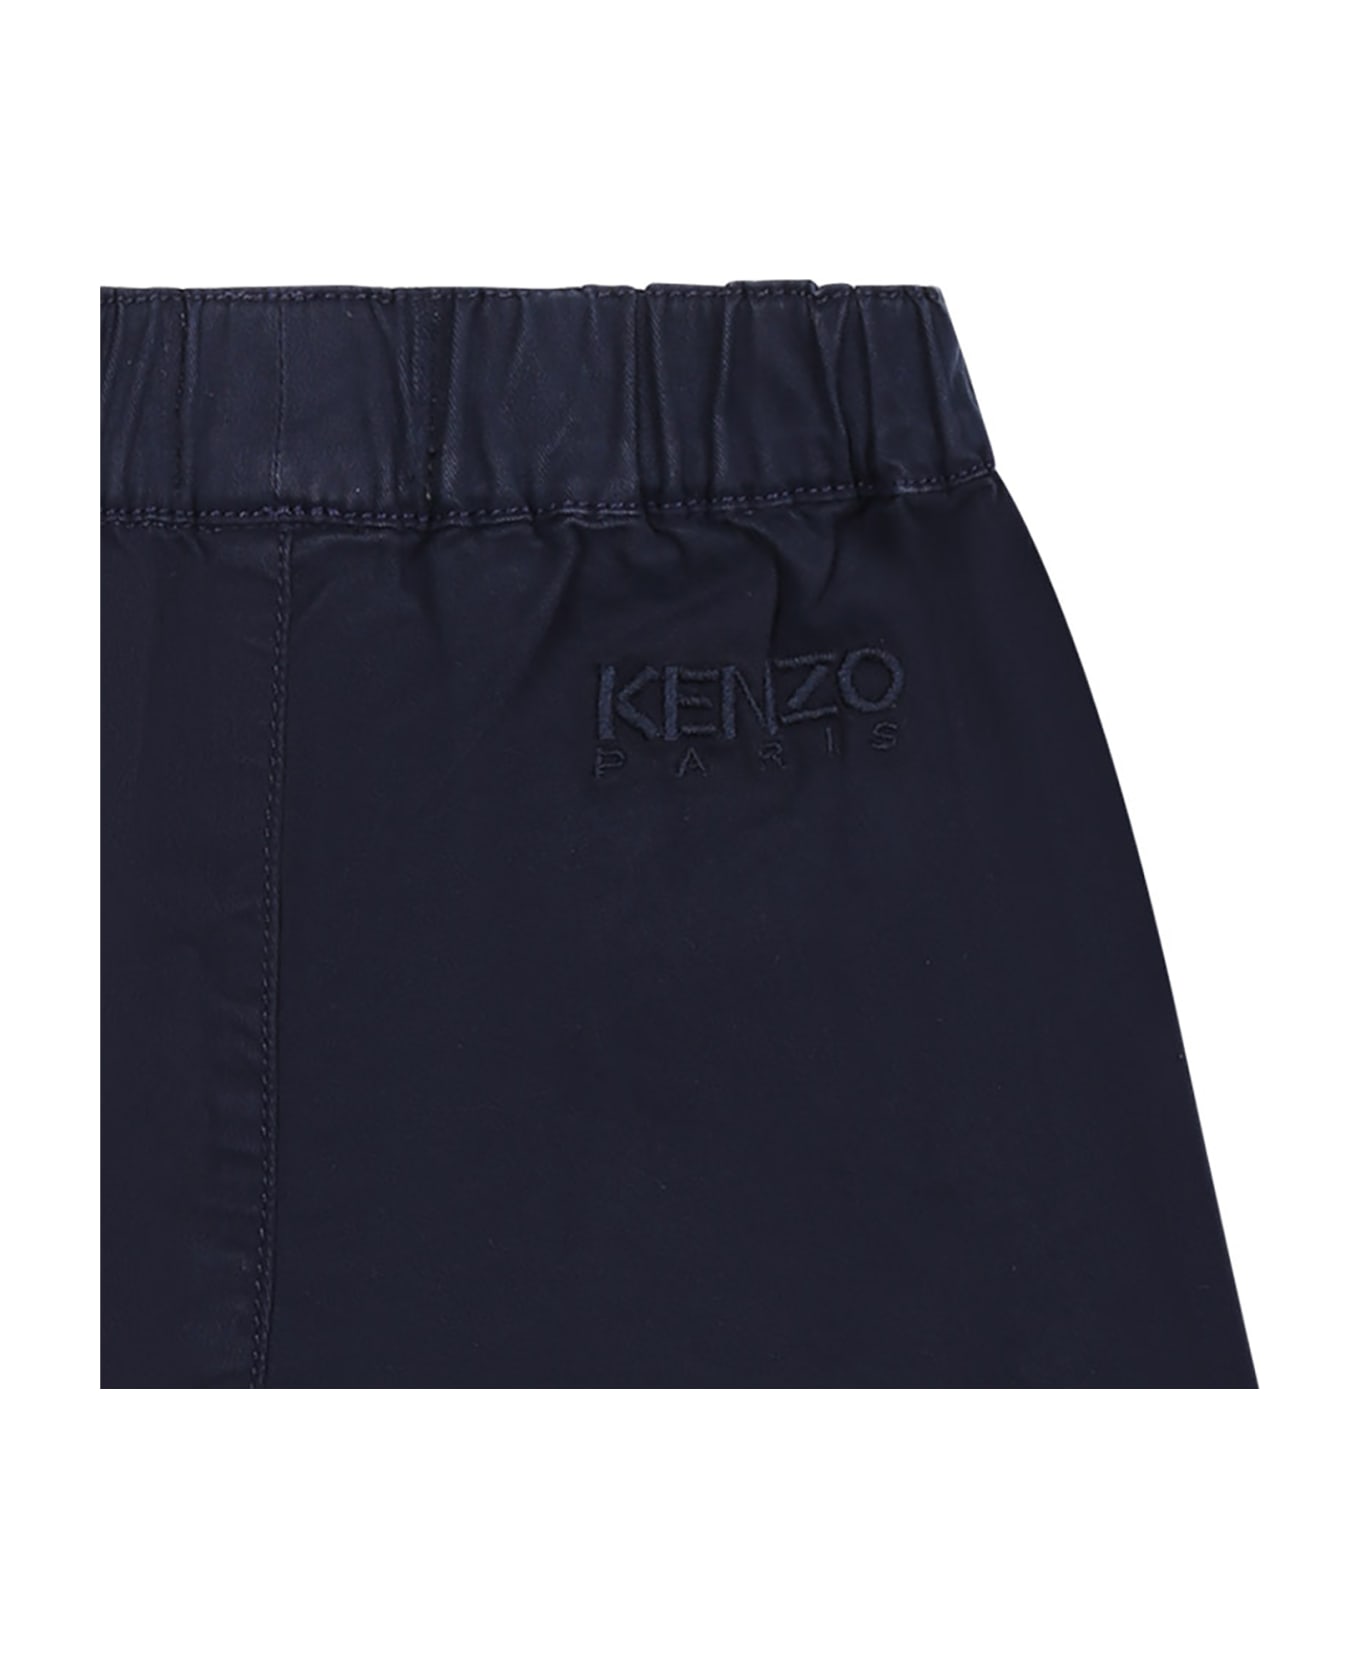 Kenzo Kids Blue Casual Shorts For Baby Boy - Blue